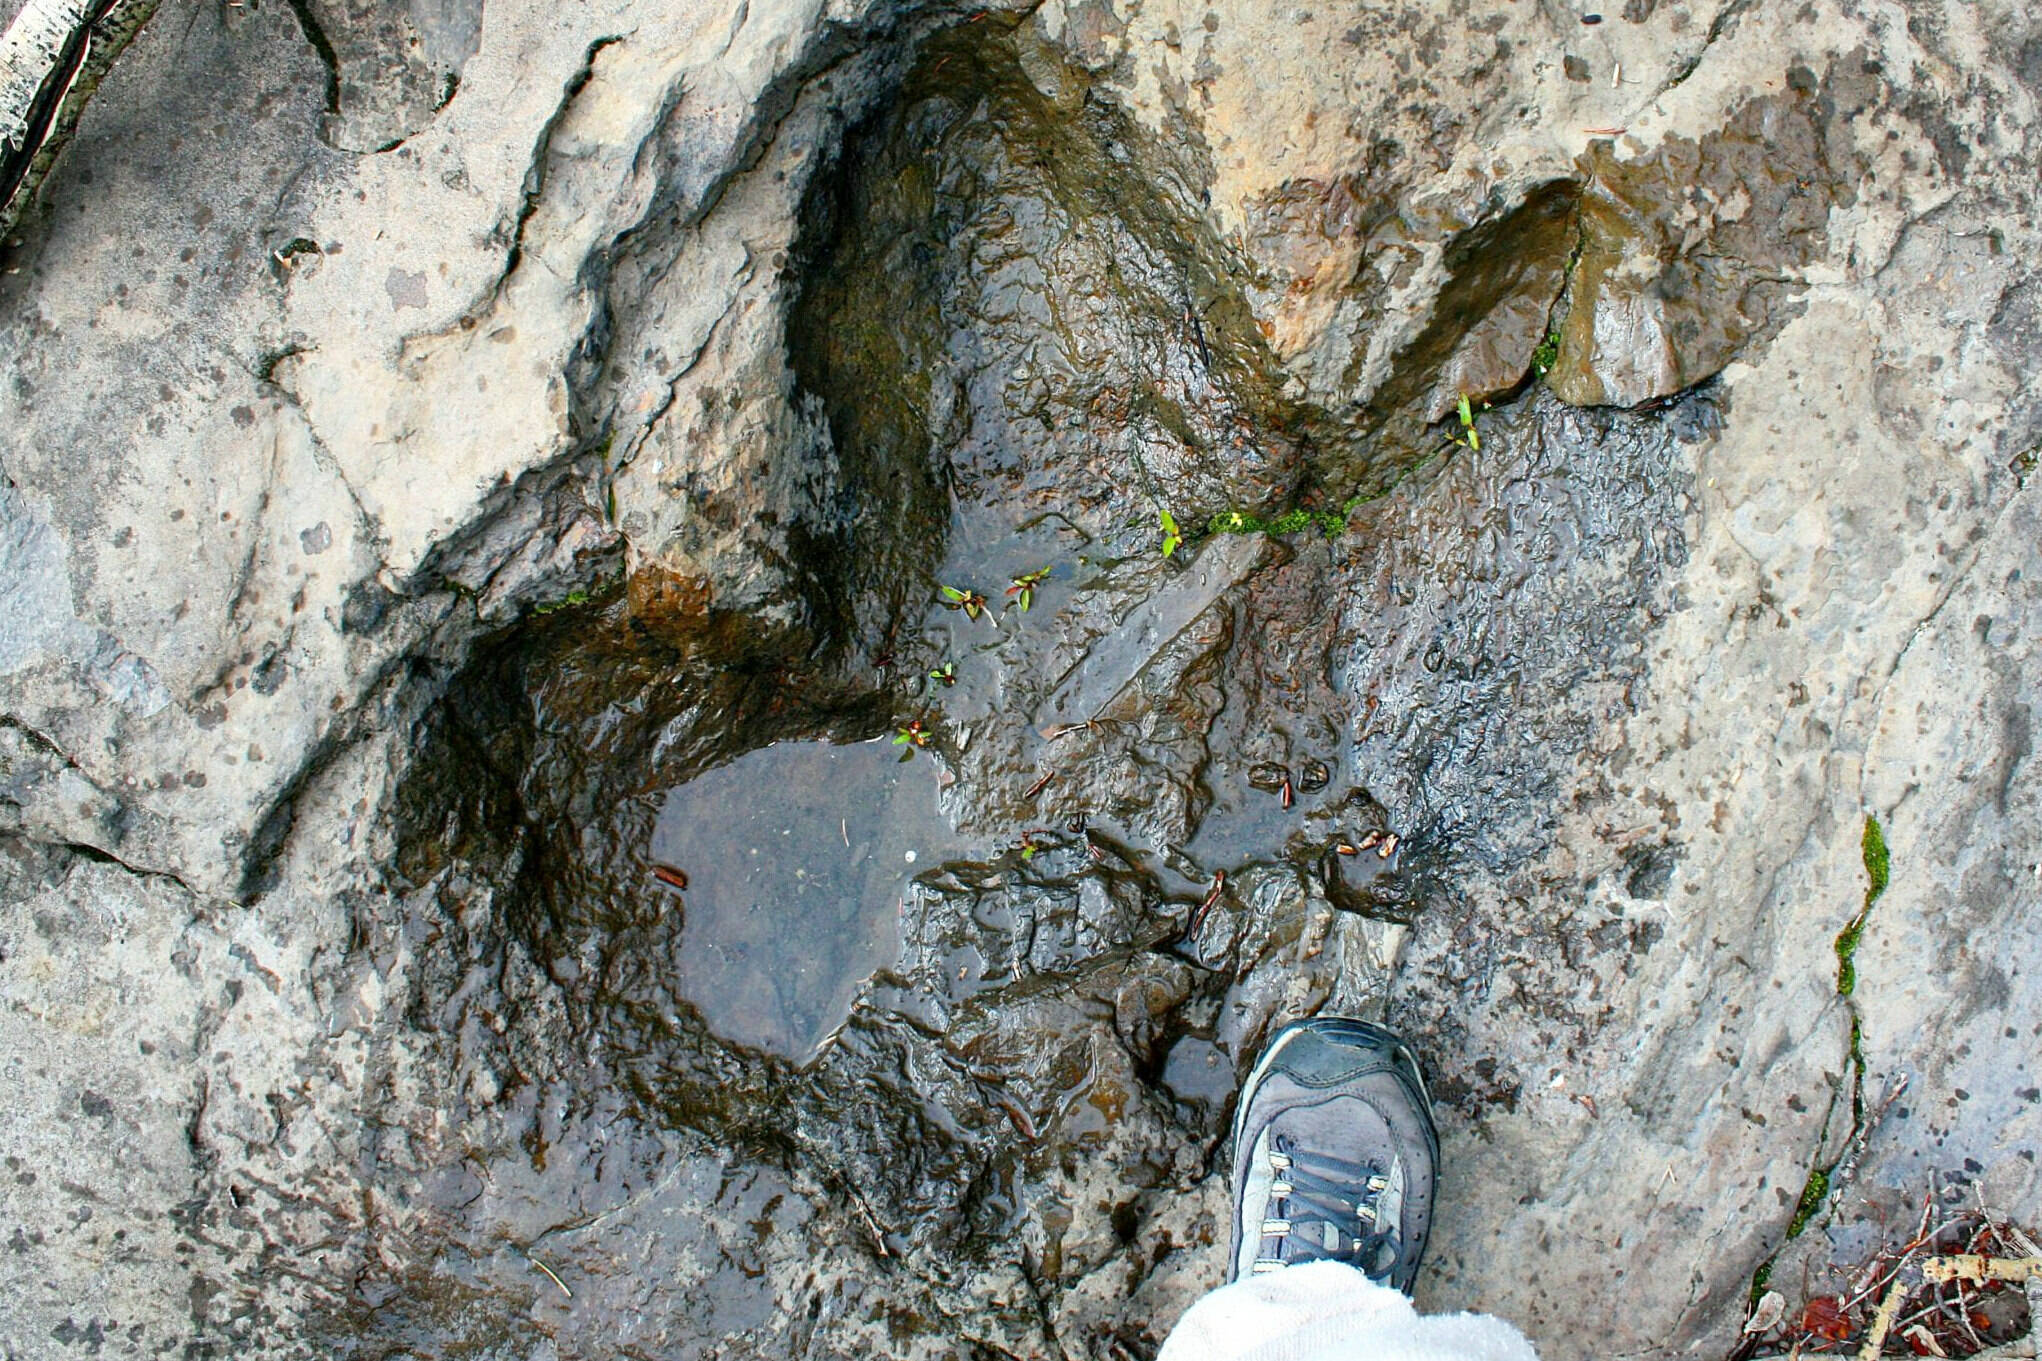 A northeast B.C. dinosaur footprint compared to a human foot. (District of Hudson’s Hope website)